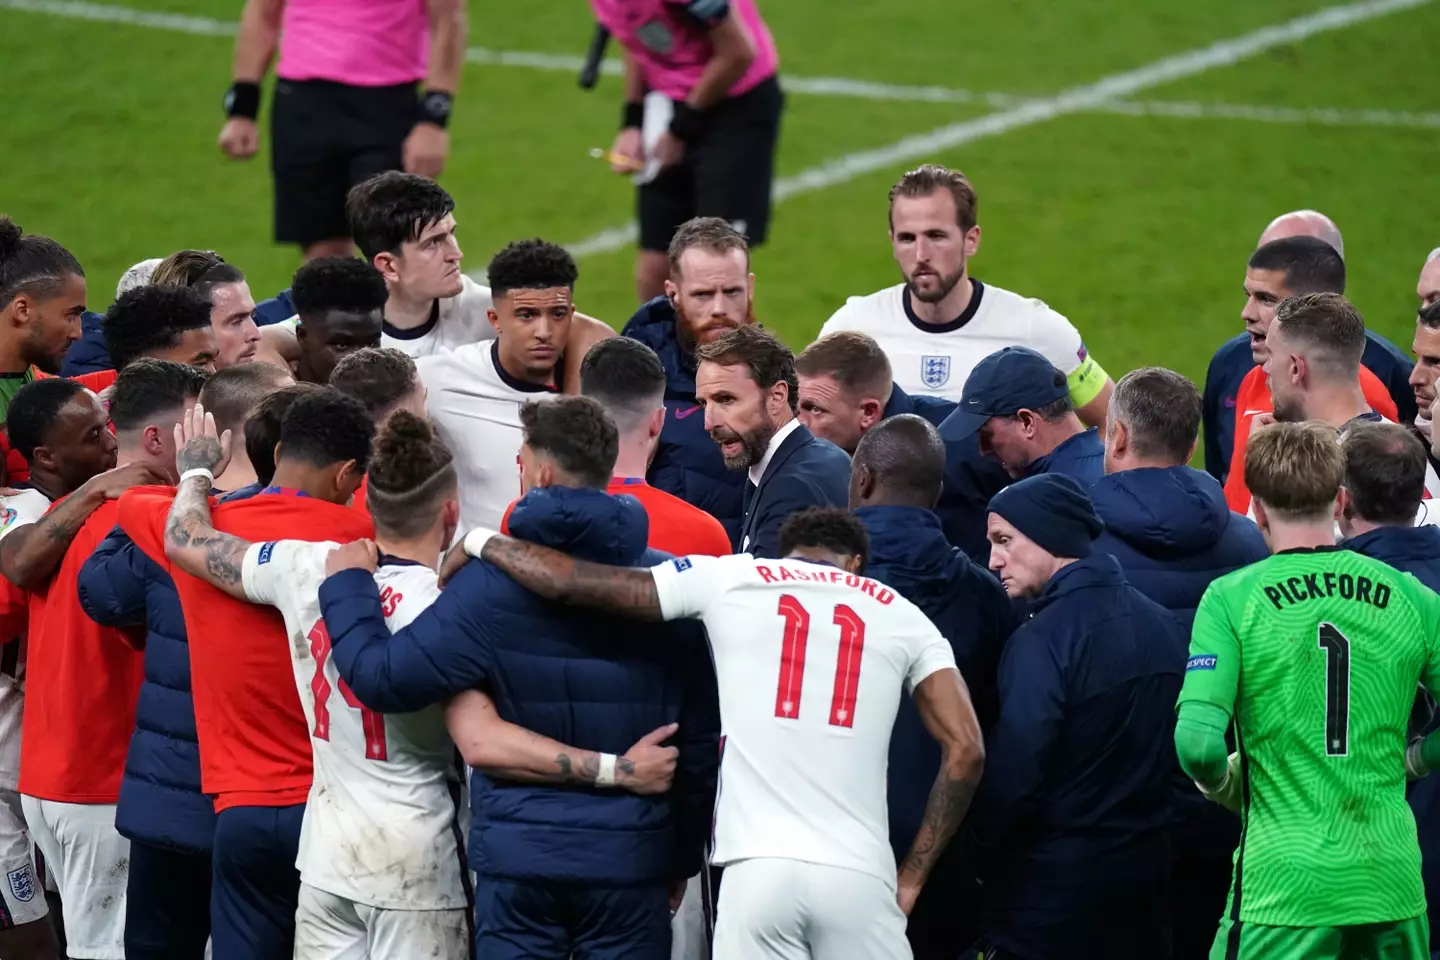 The England squad will reunite for the first time since their Euro 2020 defeat